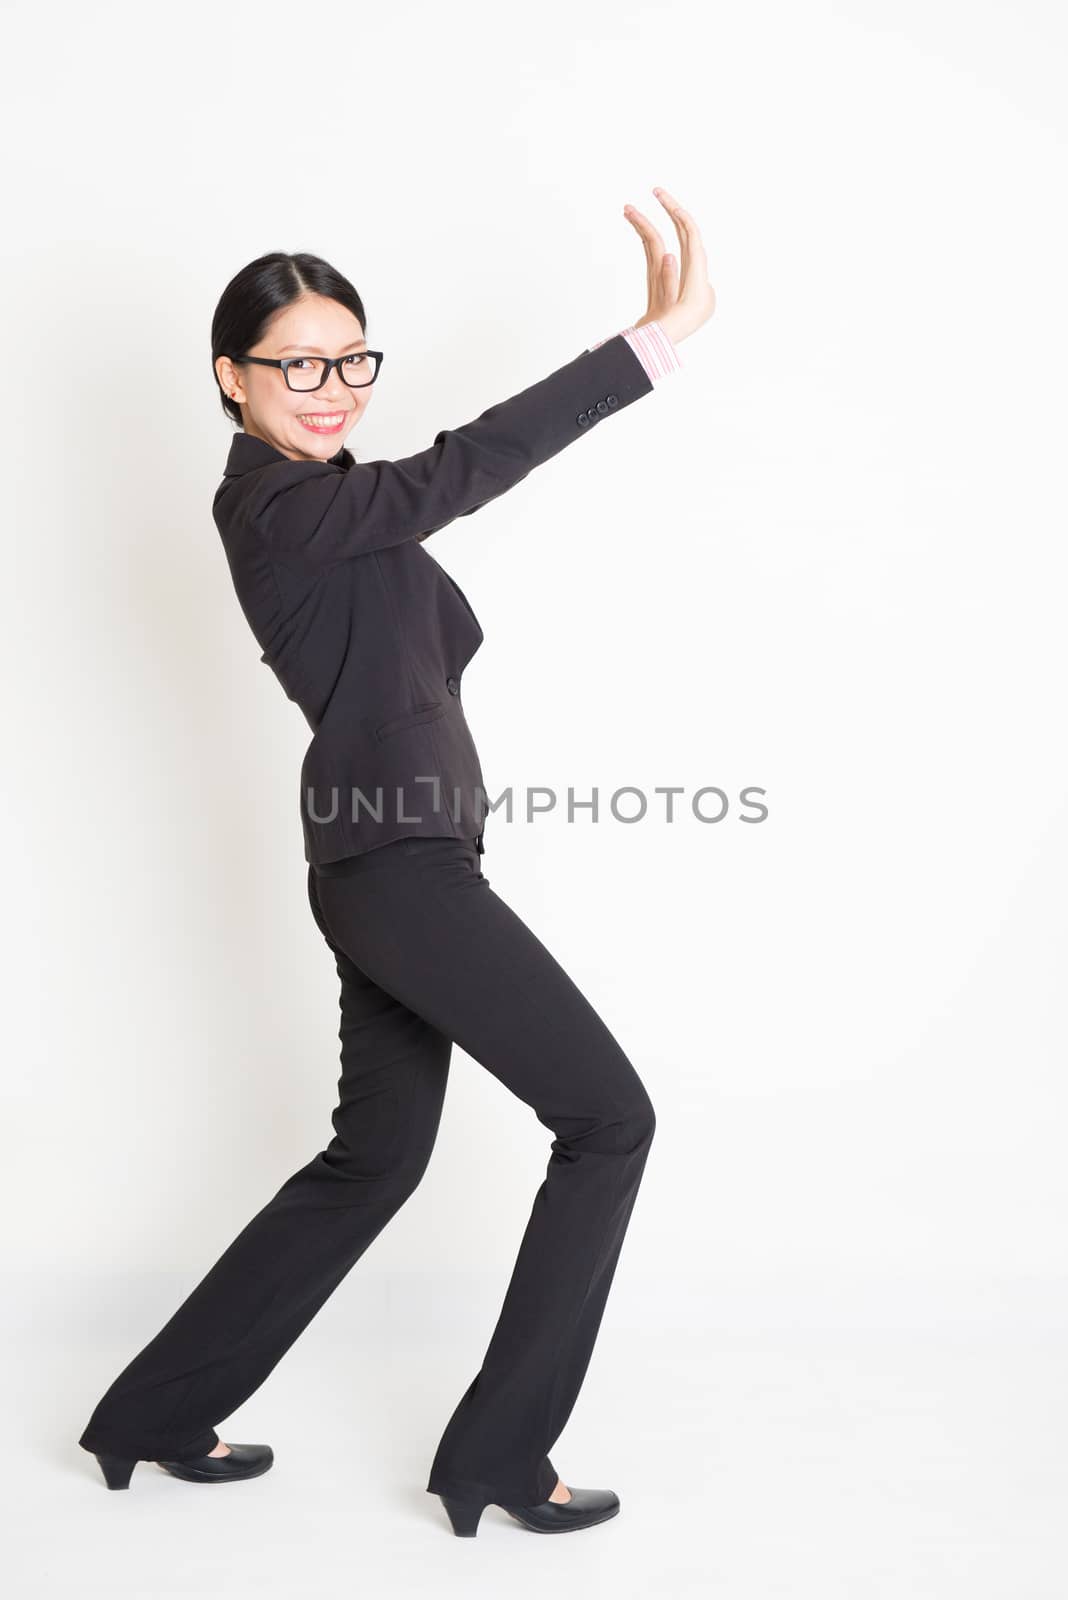 Full body portrait of young Asian businesswoman in formalwear hands pushing on something and smiling, standing on plain background.